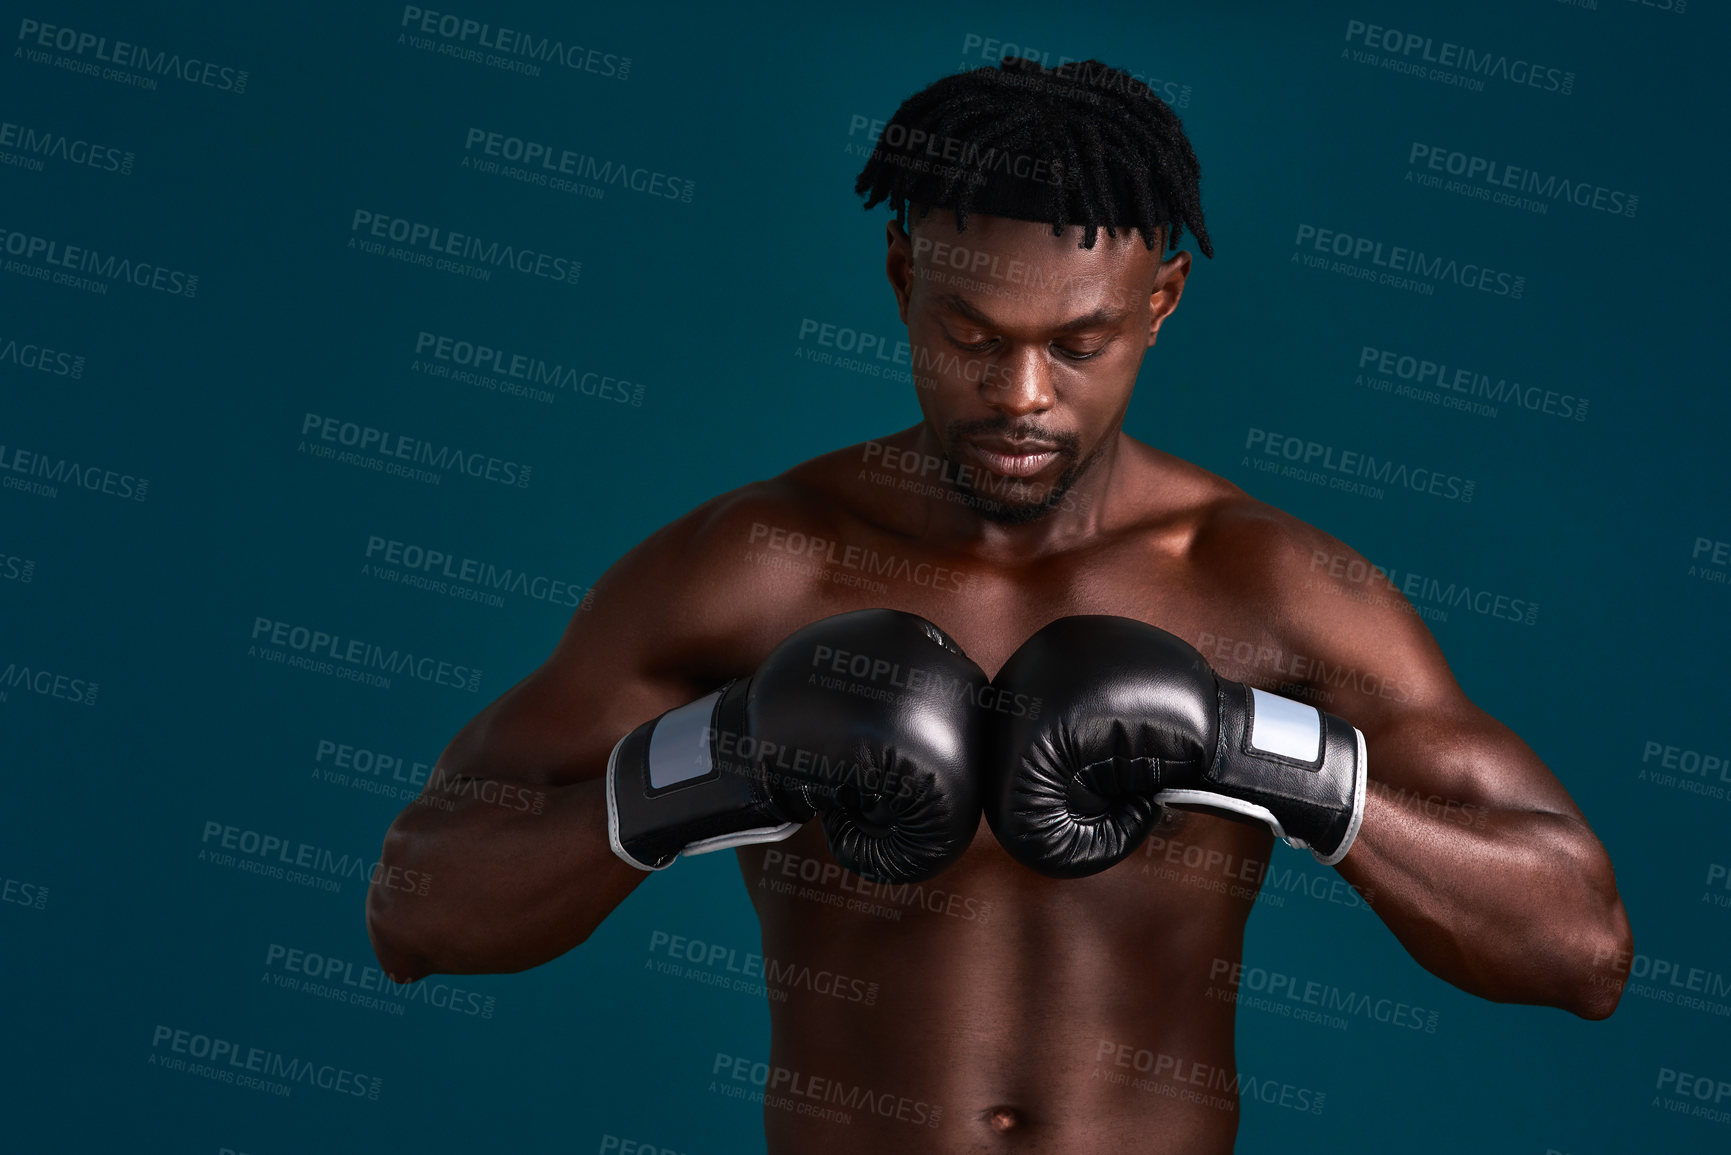 Buy stock photo Cropped shot of a handsome young boxer working out against a dark background in the studio